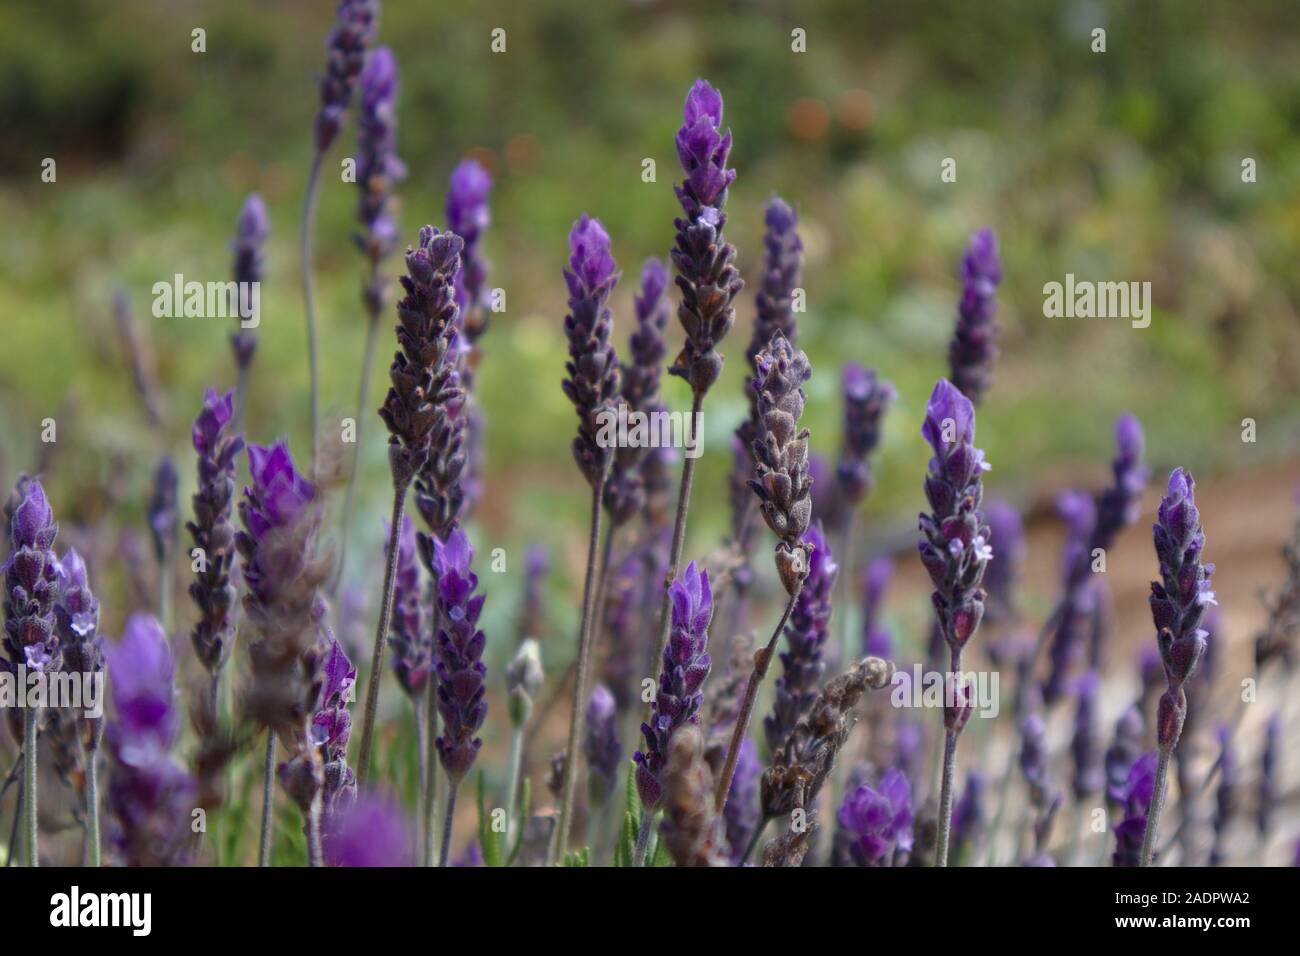 Close-up of a bush of lavender flowers in late summer, in the background the rest of the green vegetation is out of focus Stock Photo